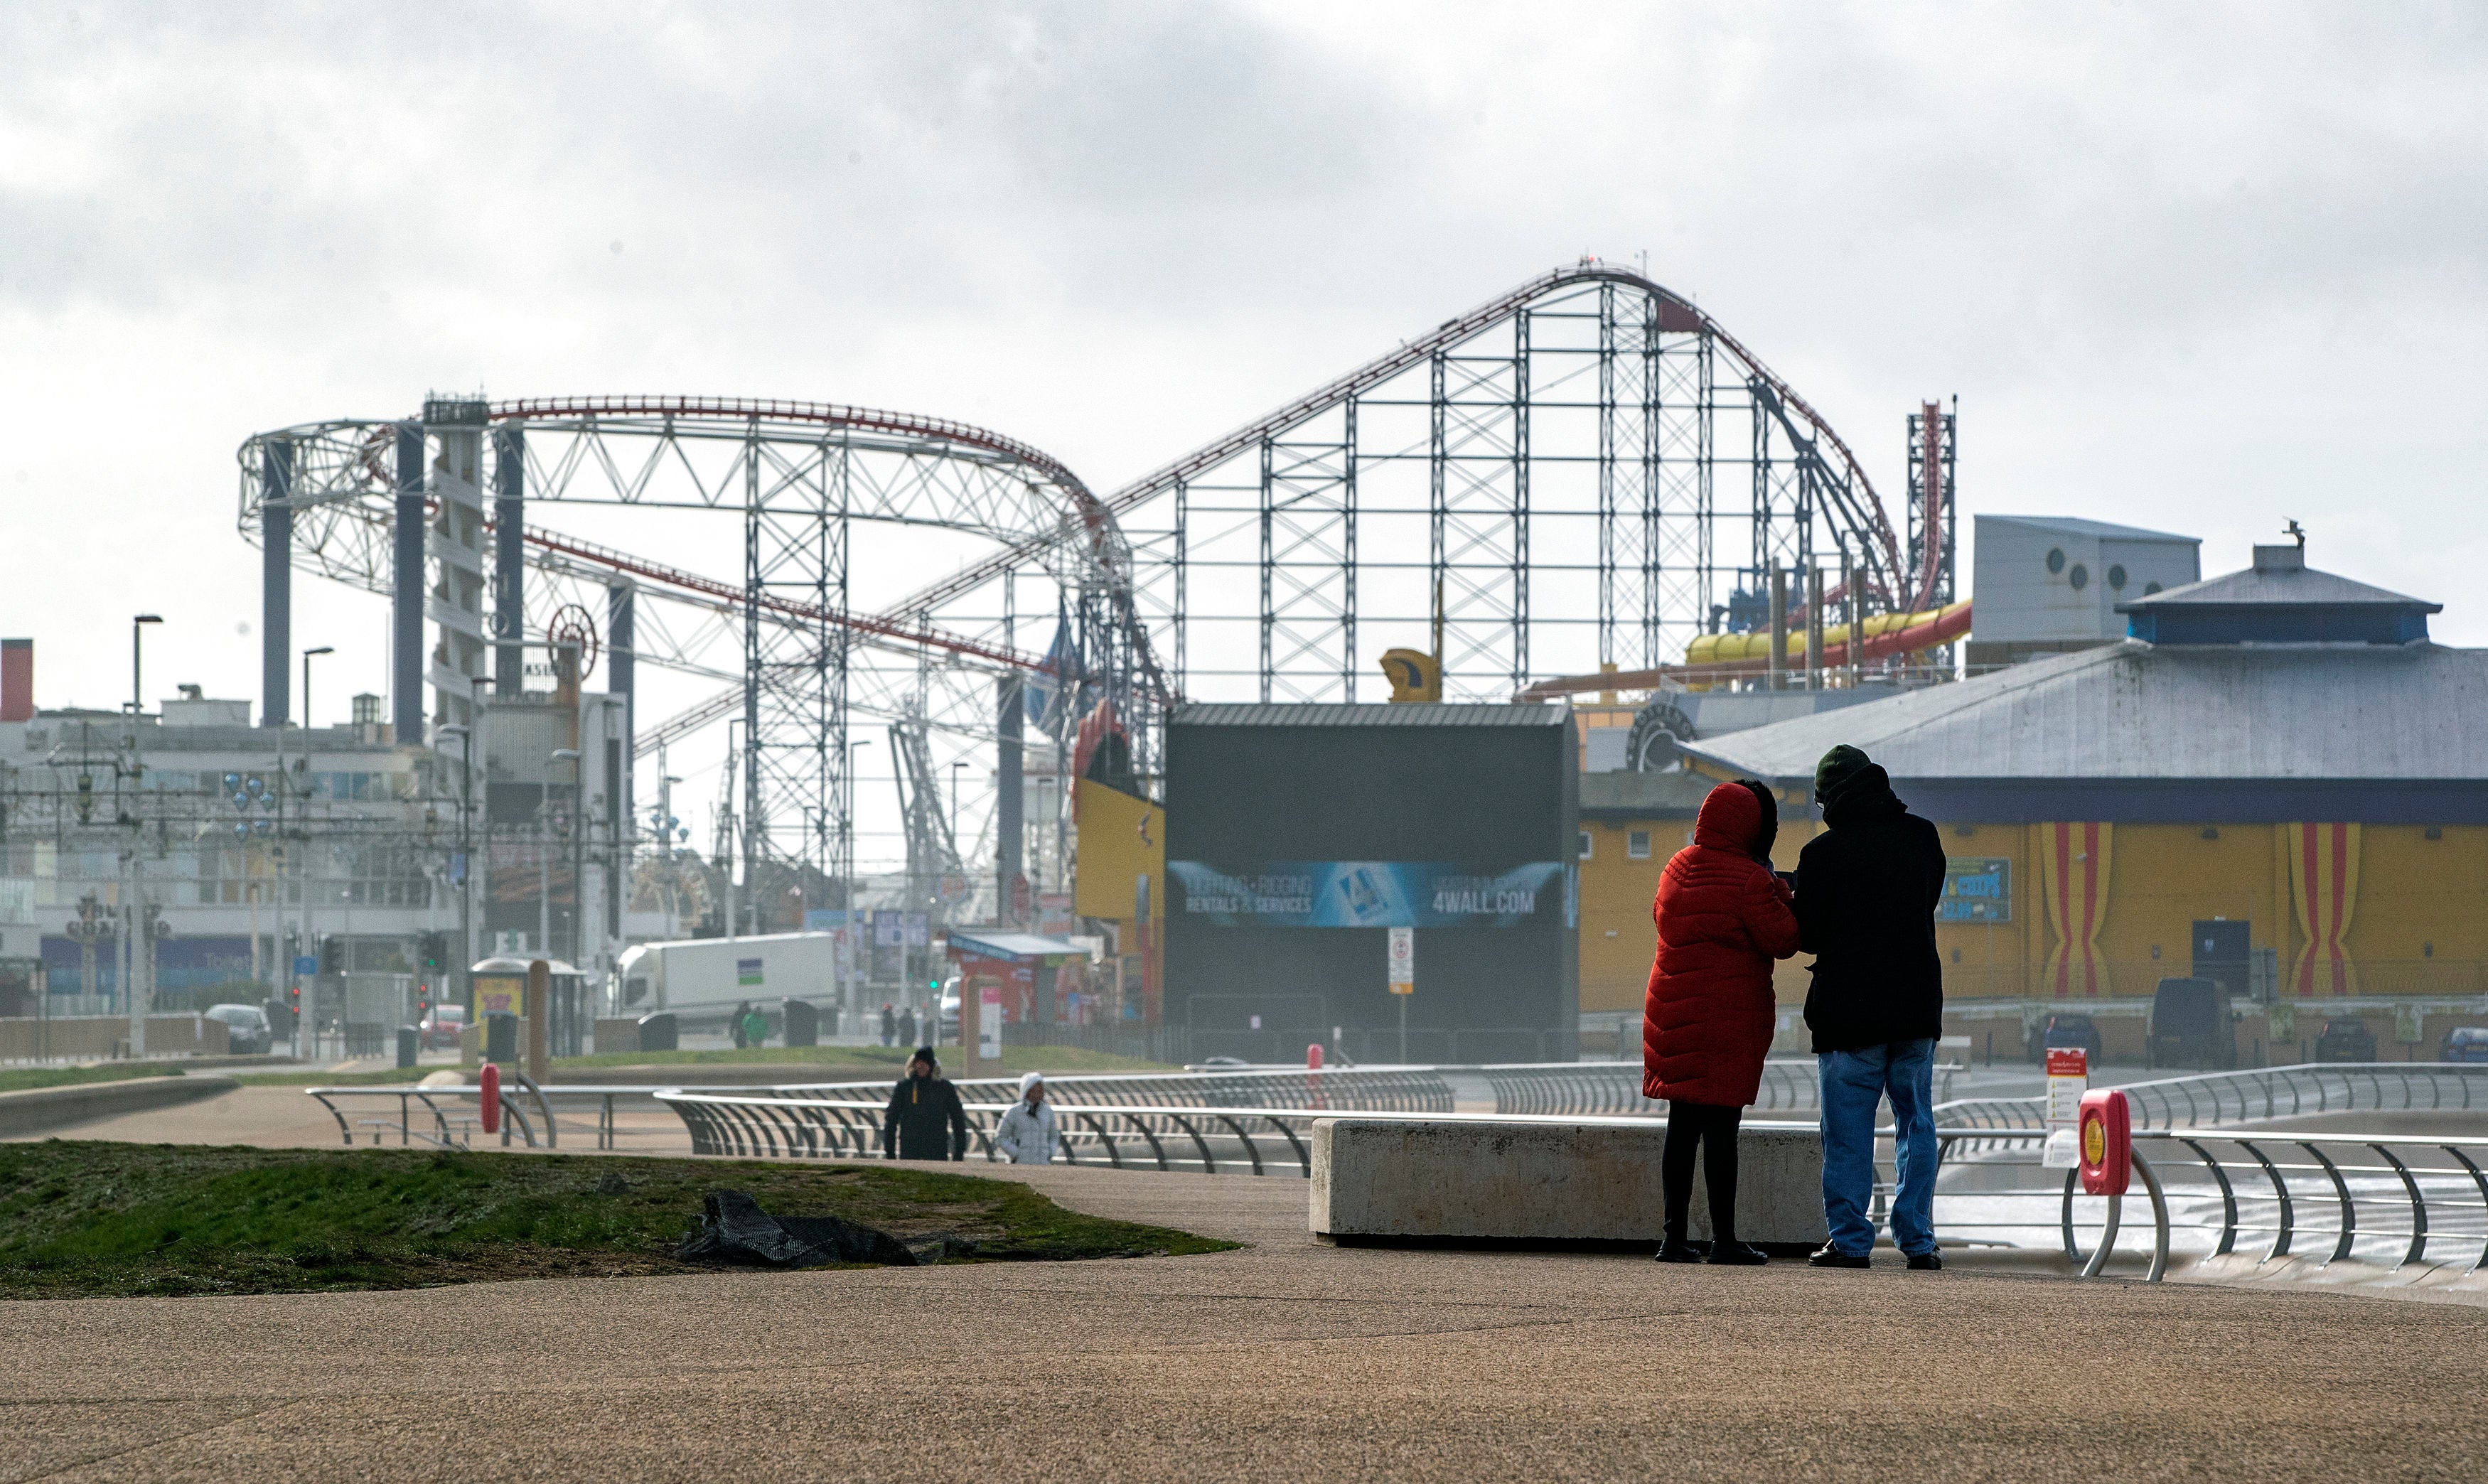 The popular promenade at Blackpool, where authorities want to eradicate lap dancing clubs to improve the town’s image